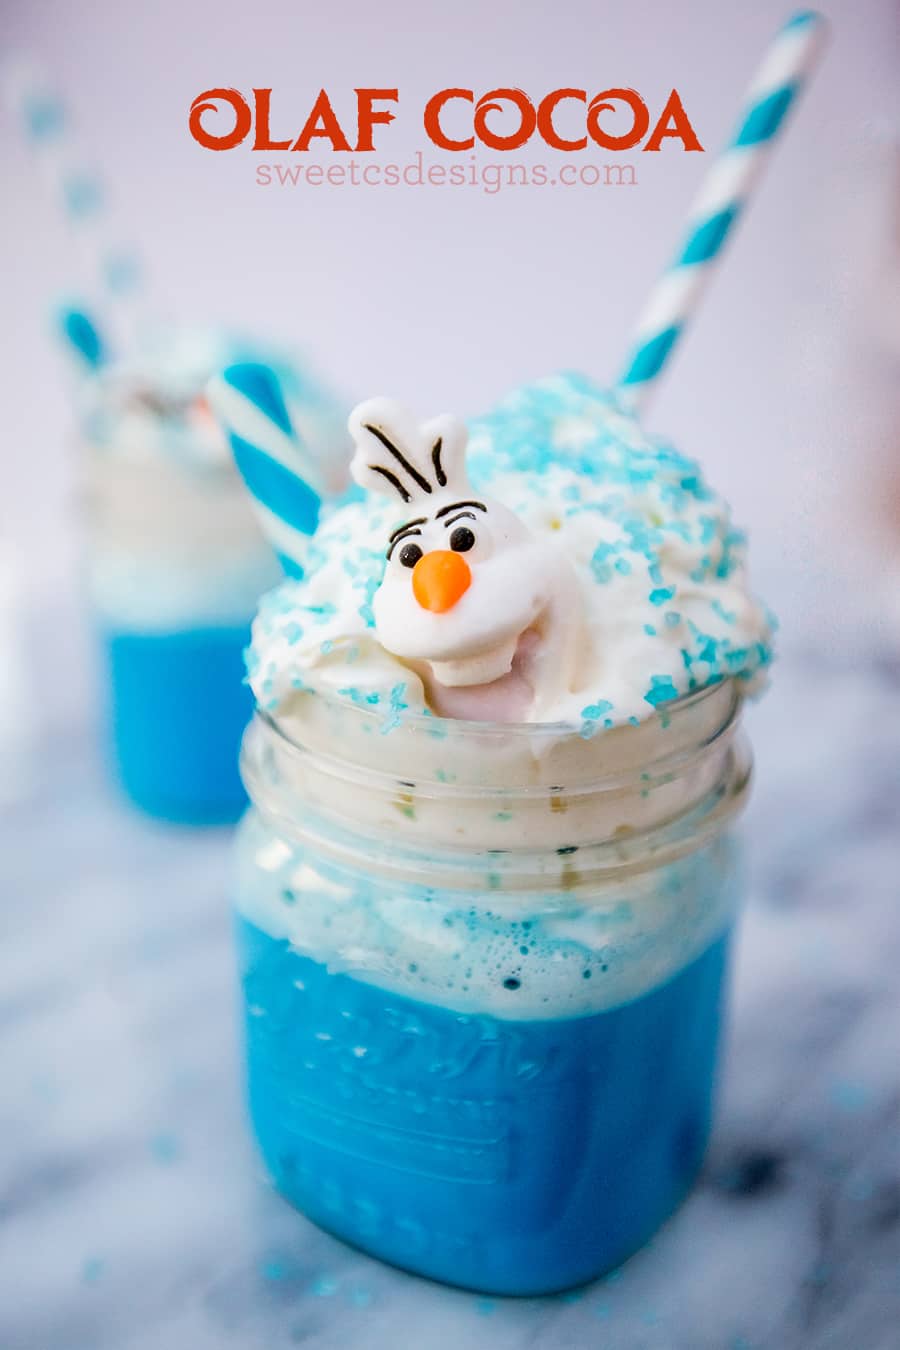 Olaf hot cocoa- i love this blue tinted white chocolate cocoa for winter!